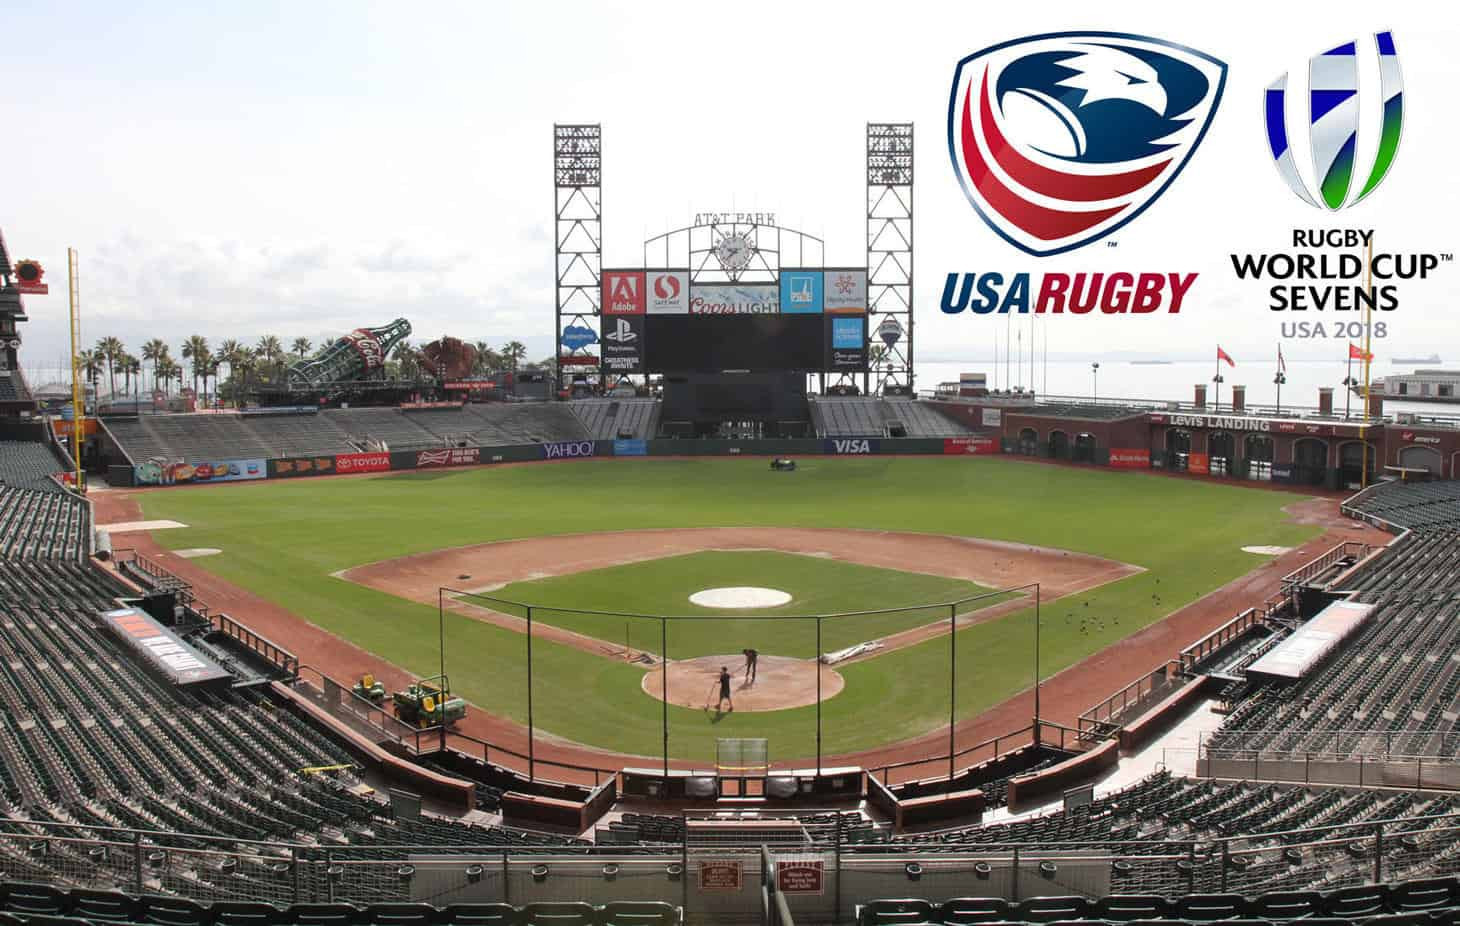 The Rugby World Cup Sevens 2018 in San Francisco is due to to take place at a converted baseball stadium ©USA Rugby